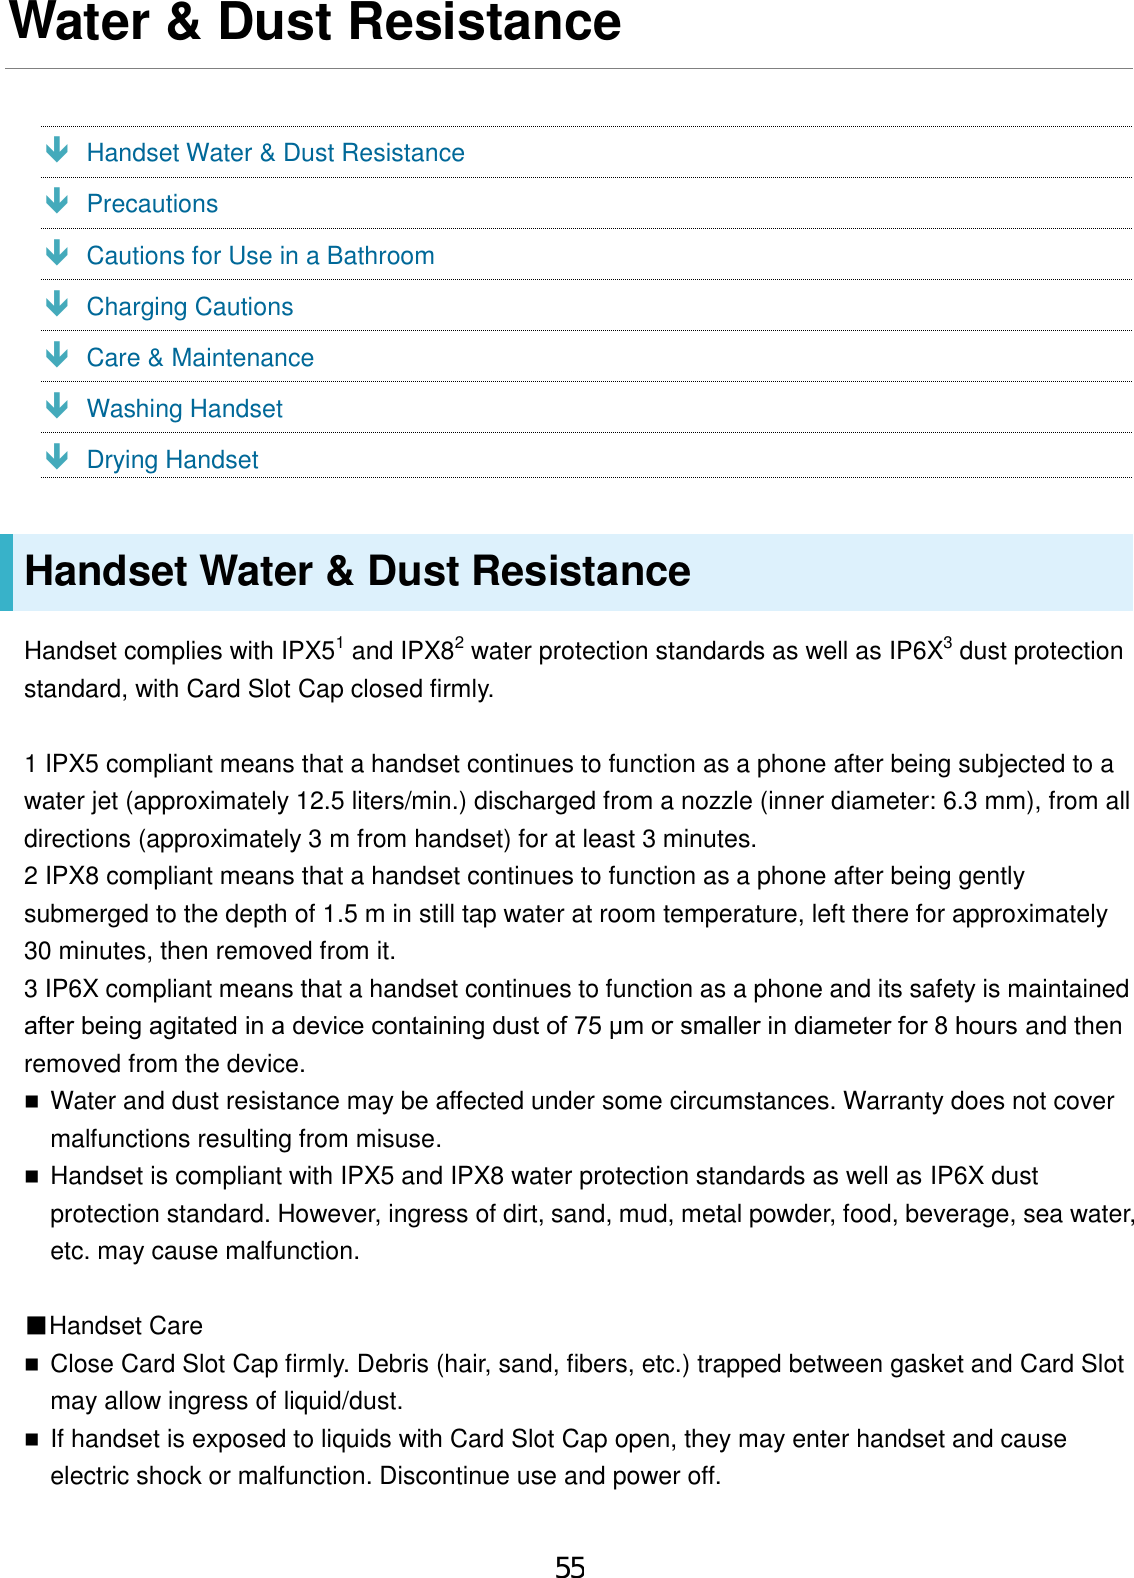 Water &amp; Dust Resistance  Handset Water &amp; Dust Resistance  Precautions  Cautions for Use in a Bathroom  Charging Cautions  Care &amp; Maintenance  Washing Handset  Drying Handset Handset Water &amp; Dust Resistance Handset complies with IPX51 and IPX82 water protection standards as well as IP6X3 dust protection standard, with Card Slot Cap closed firmly. 1 IPX5 compliant means that a handset continues to function as a phone after being subjected to a water jet (approximately 12.5 liters/min.) discharged from a nozzle (inner diameter: 6.3 mm), from all directions (approximately 3 m from handset) for at least 3 minutes. 2 IPX8 compliant means that a handset continues to function as a phone after being gently submerged to the depth of 1.5 m in still tap water at room temperature, left there for approximately 30 minutes, then removed from it. 3 IP6X compliant means that a handset continues to function as a phone and its safety is maintained after being agitated in a device containing dust of 75 μm or smaller in diameter for 8 hours and then removed from the device. Water and dust resistance may be affected under some circumstances. Warranty does not covermalfunctions resulting from misuse.Handset is compliant with IPX5 and IPX8 water protection standards as well as IP6X dustprotection standard. However, ingress of dirt, sand, mud, metal powder, food, beverage, sea water,etc. may cause malfunction.■Handset CareClose Card Slot Cap firmly. Debris (hair, sand, fibers, etc.) trapped between gasket and Card Slotmay allow ingress of liquid/dust.If handset is exposed to liquids with Card Slot Cap open, they may enter handset and causeelectric shock or malfunction. Discontinue use and power off.55